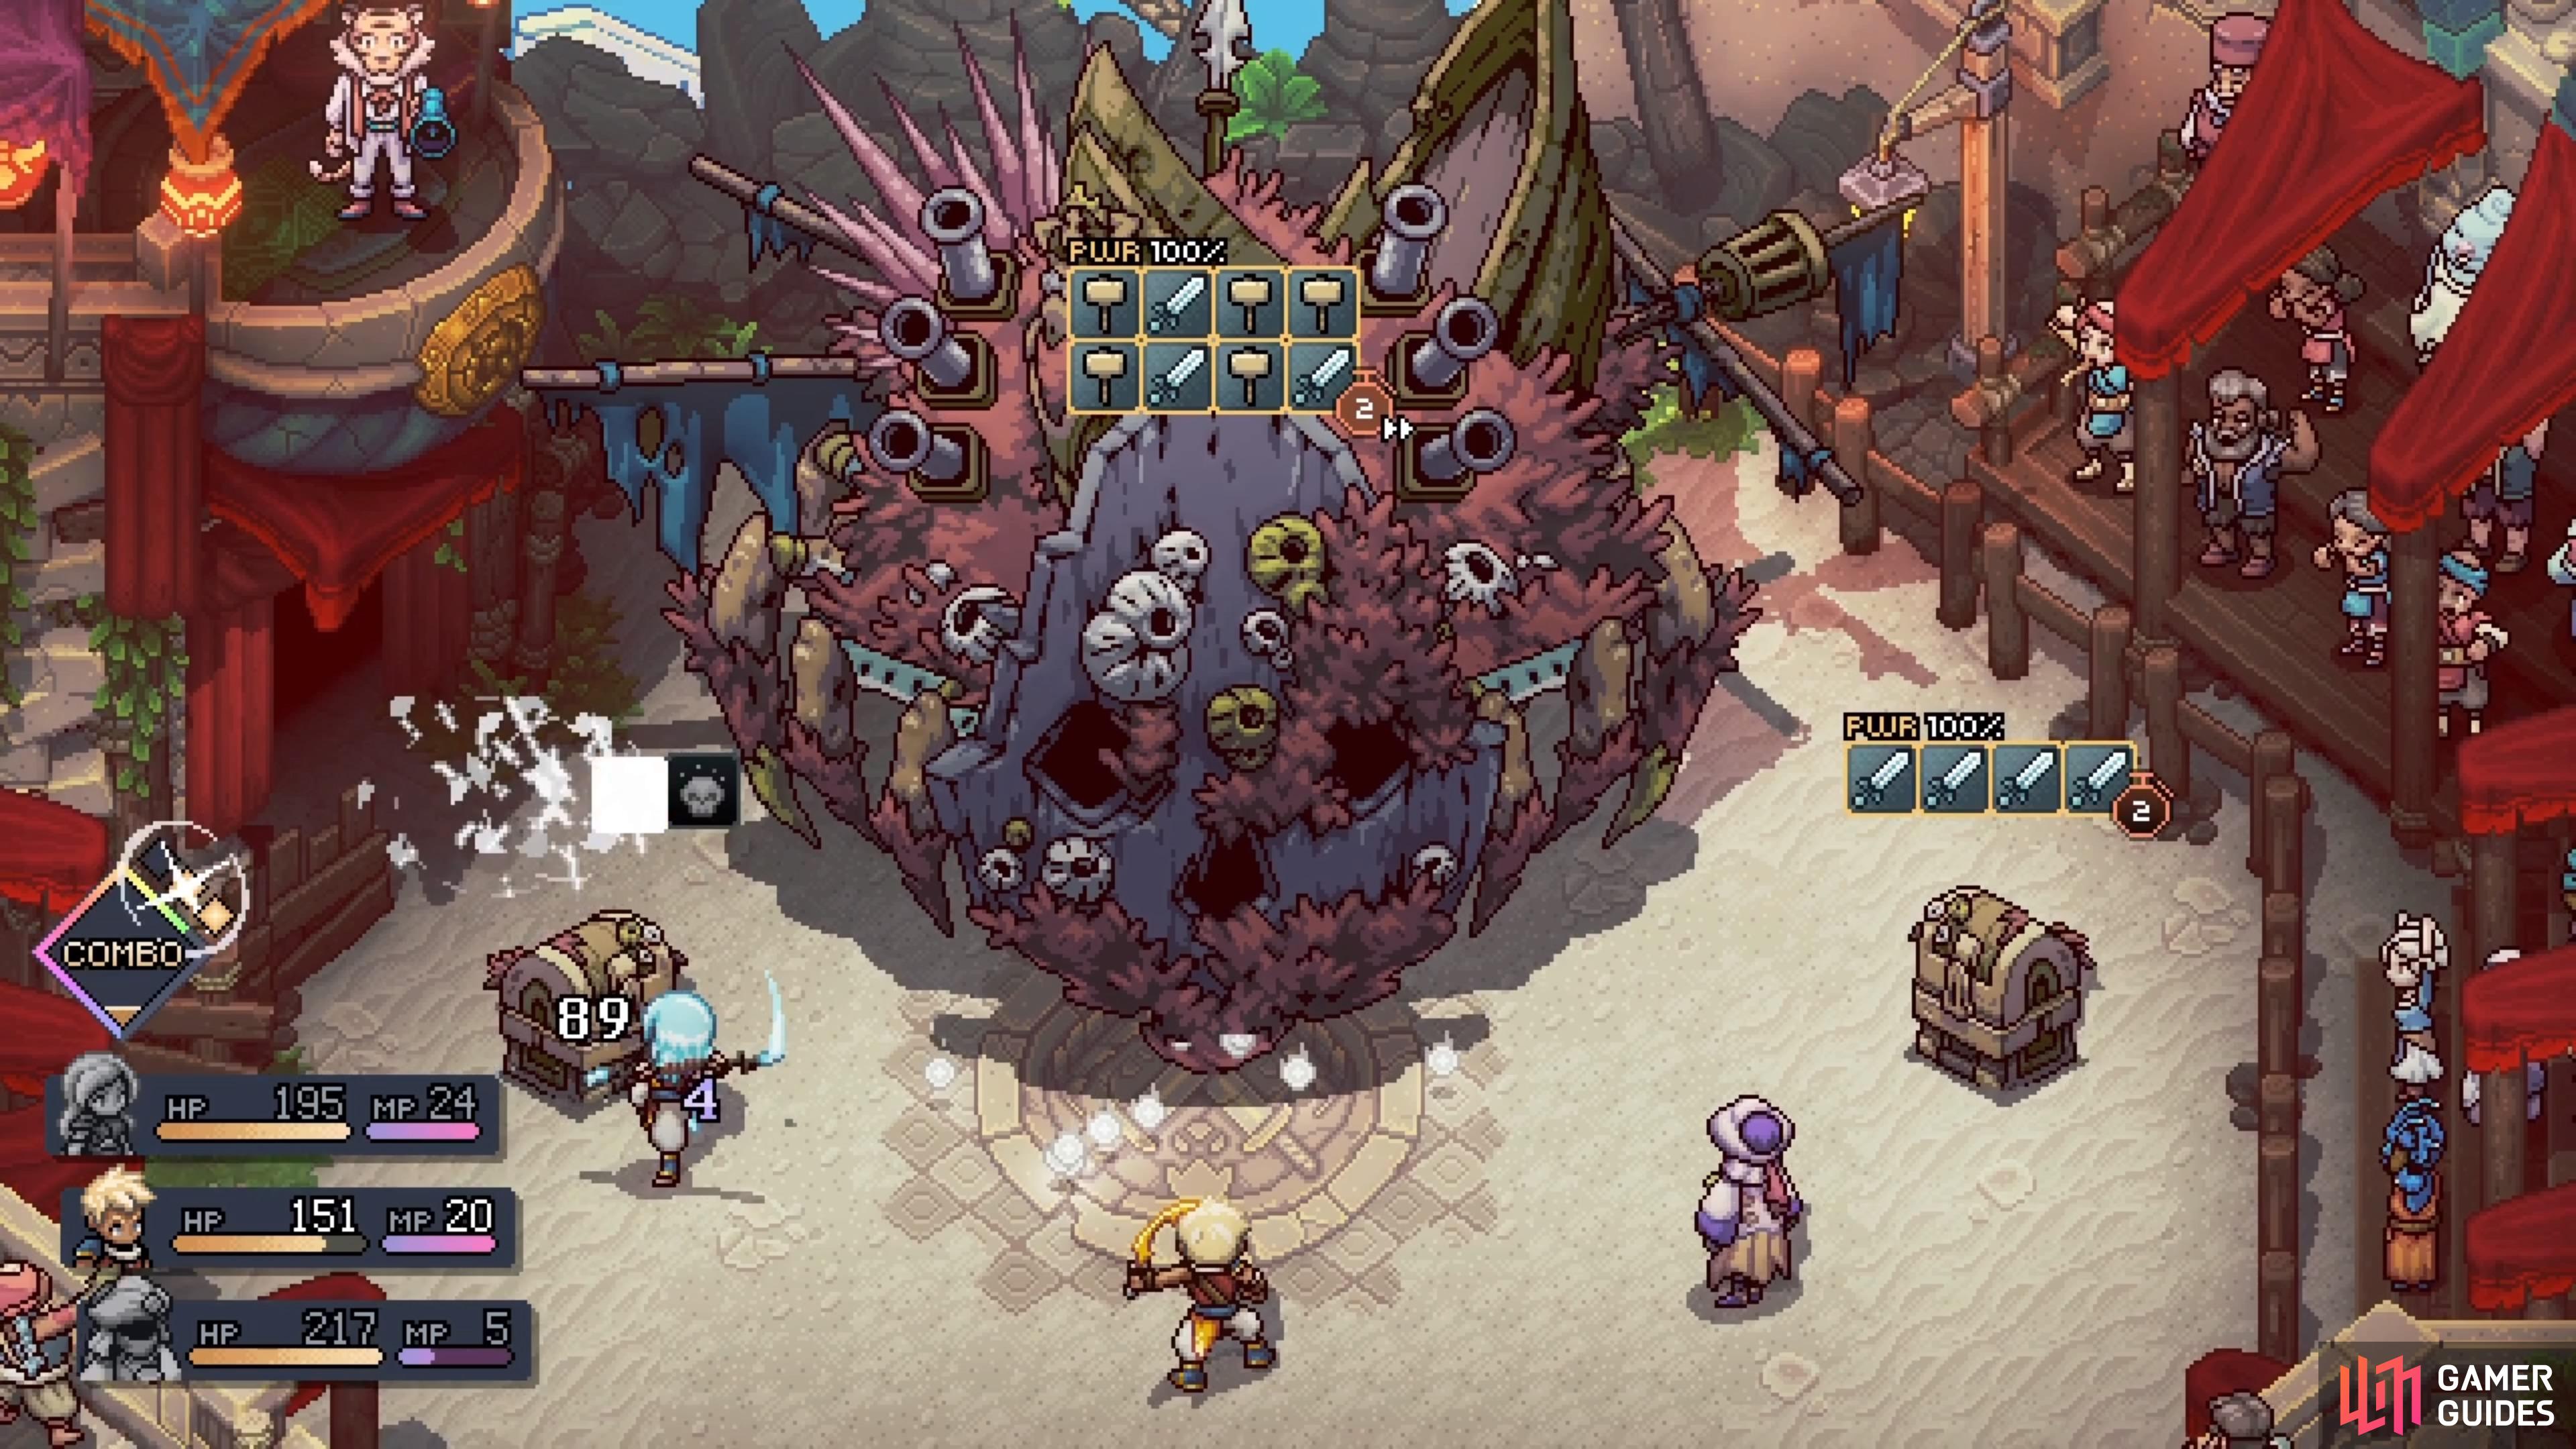 Hugely Anticipated Turn-Based RPG 'Sea Of Stars' Has Gone Gold